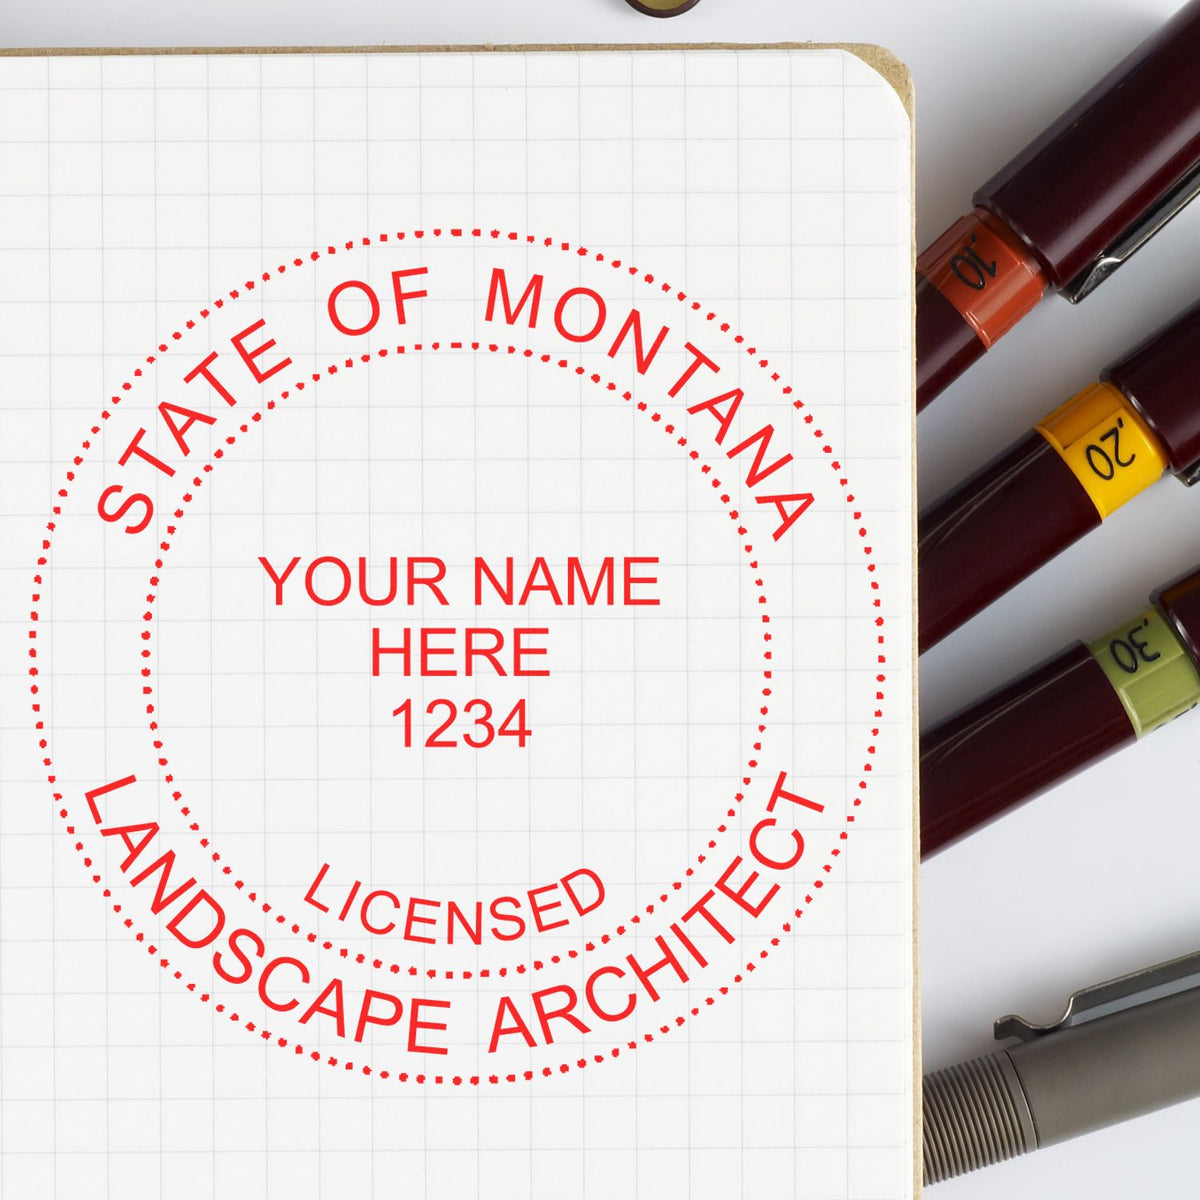 The Montana Landscape Architectural Seal Stamp stamp impression comes to life with a crisp, detailed photo on paper - showcasing true professional quality.